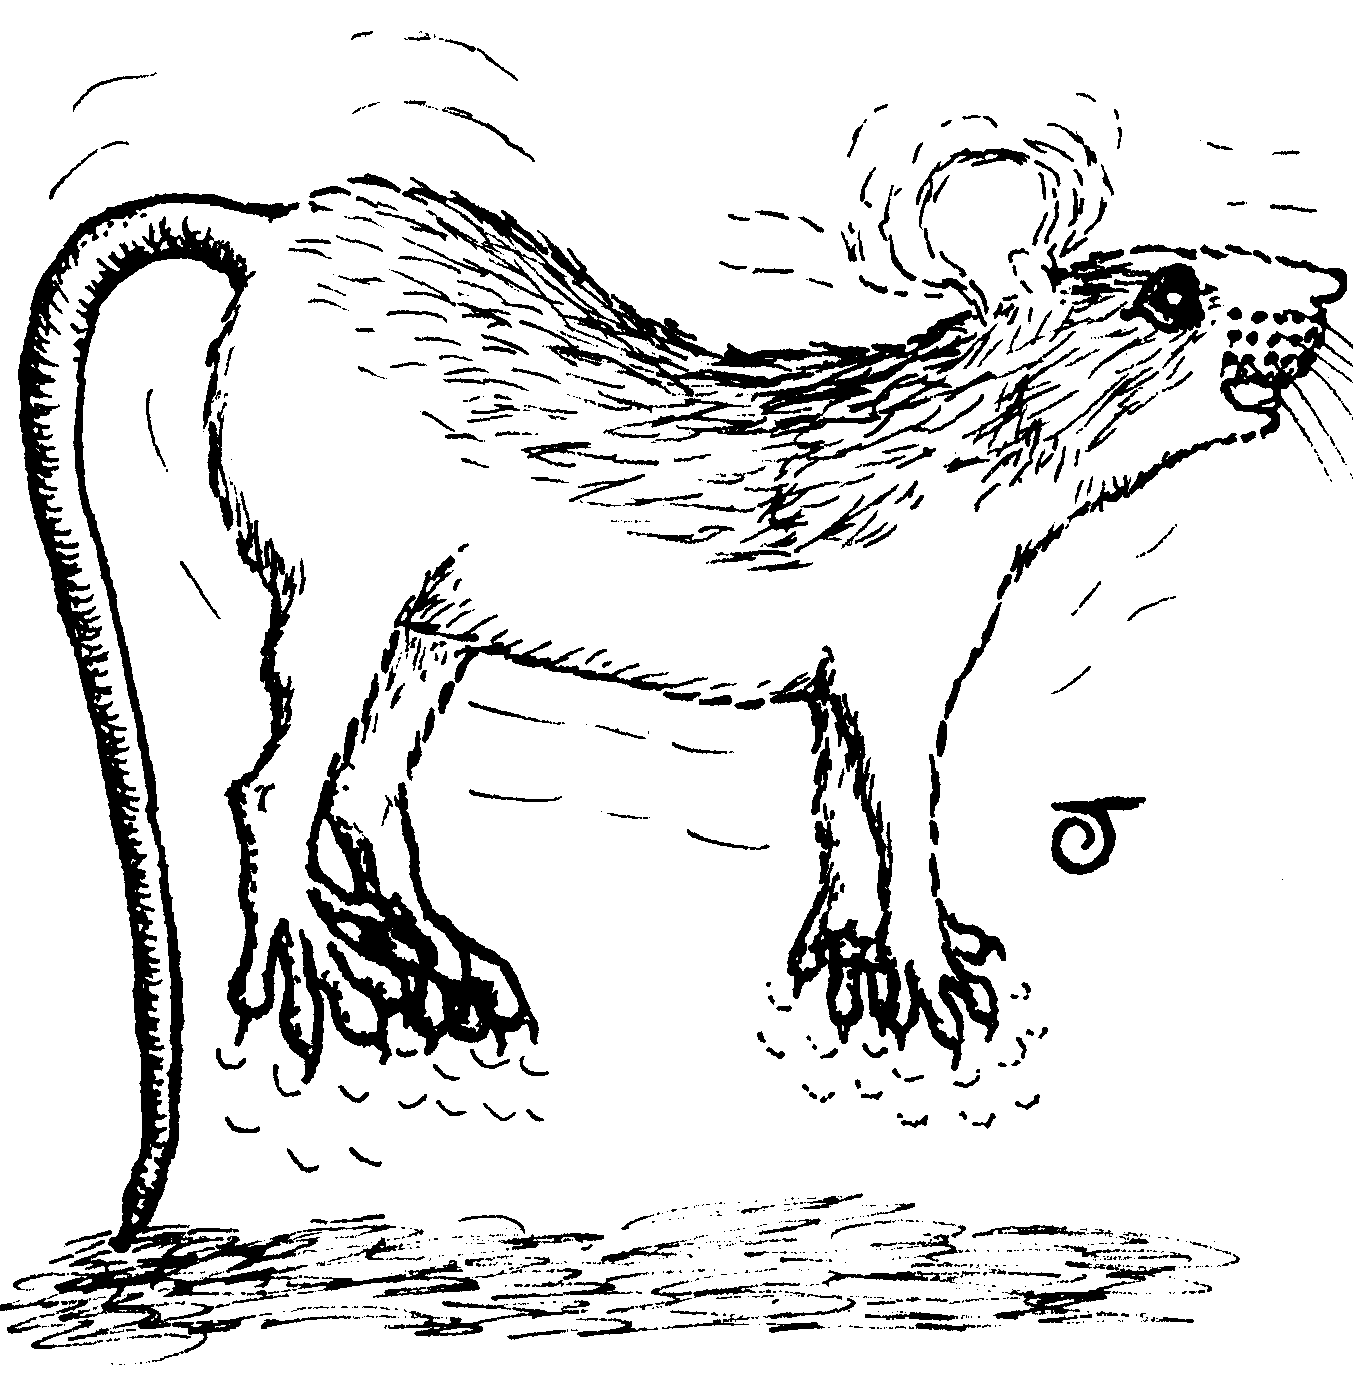 Caricature of doe rat jumping up and down on the spot and waggling her ears